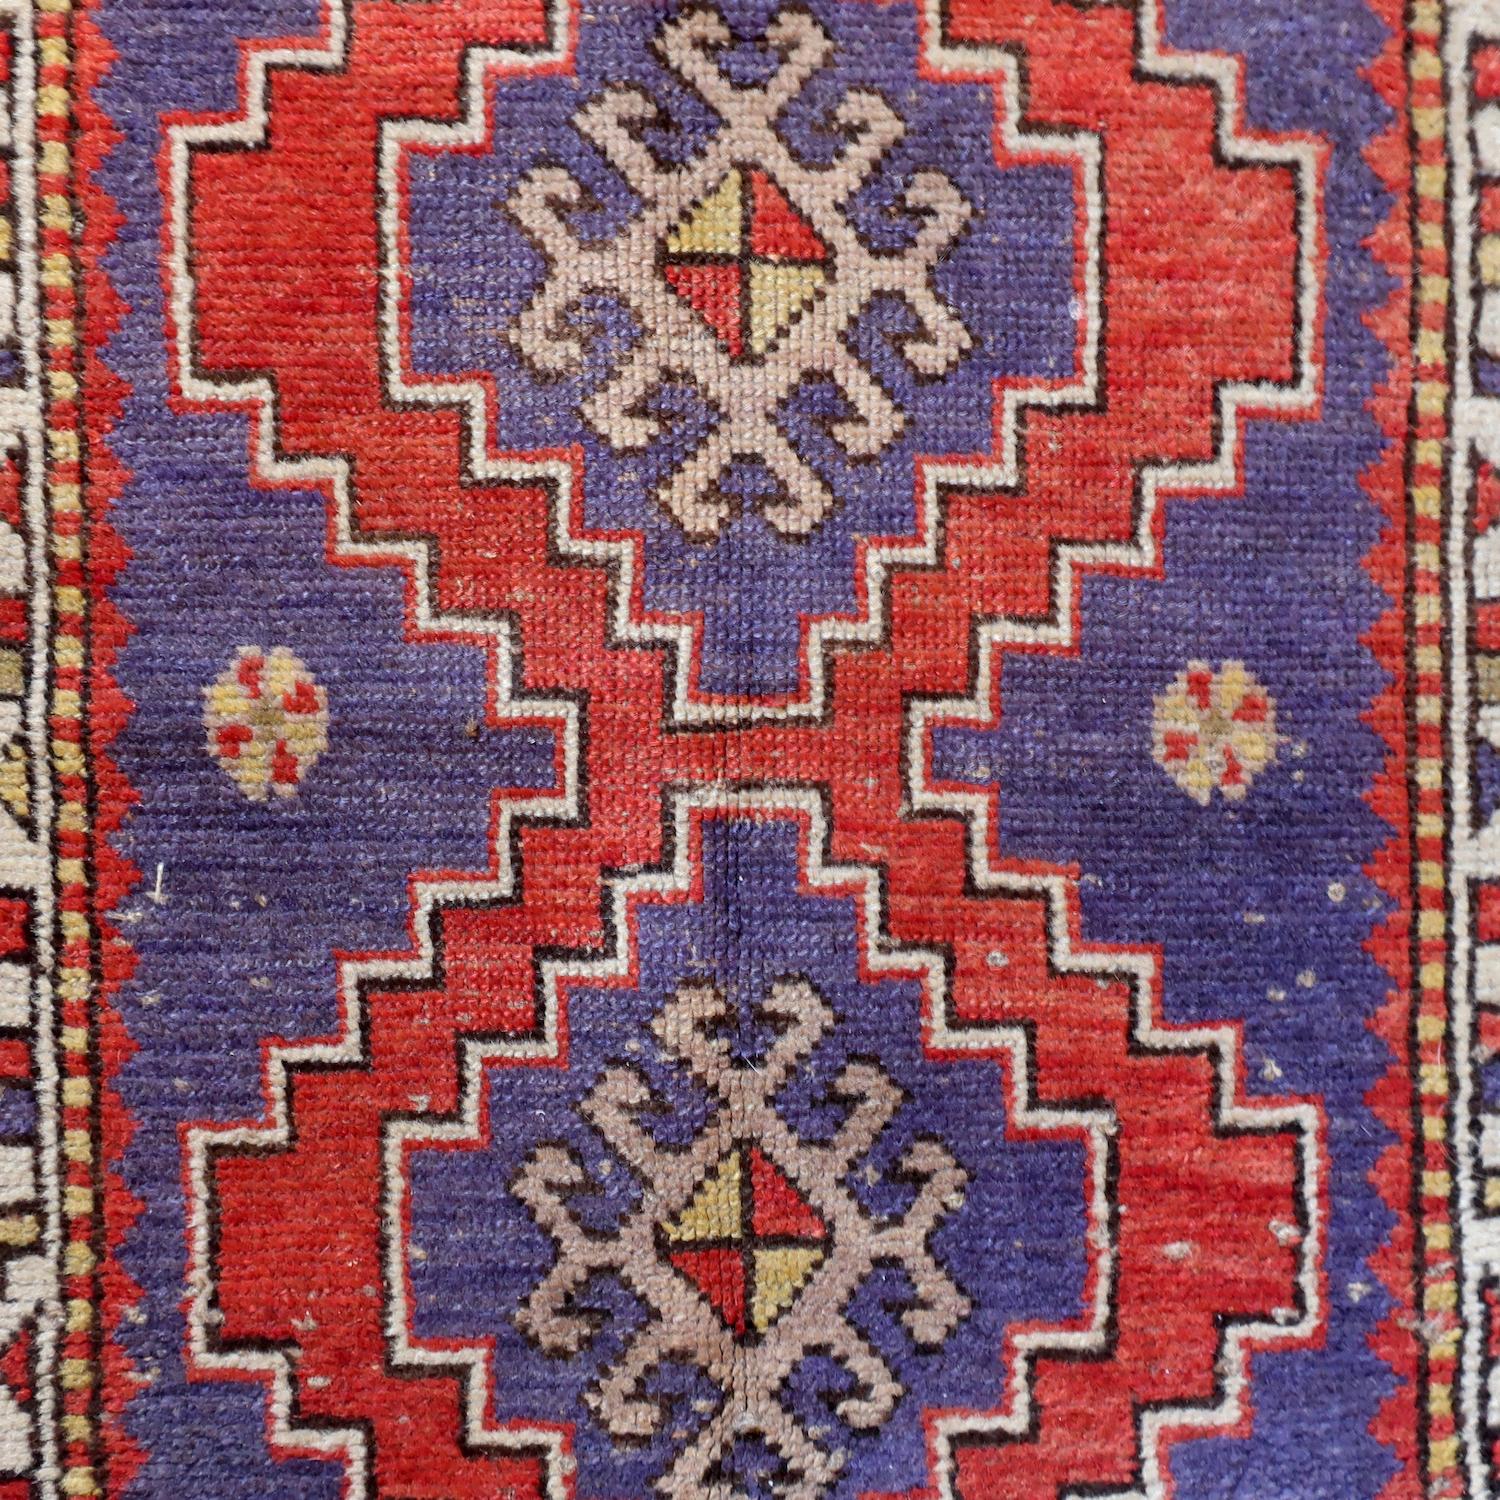 A beautiful handwoven red, blue, tan, and off-white Baluch rug.  Sometimes spelled as 